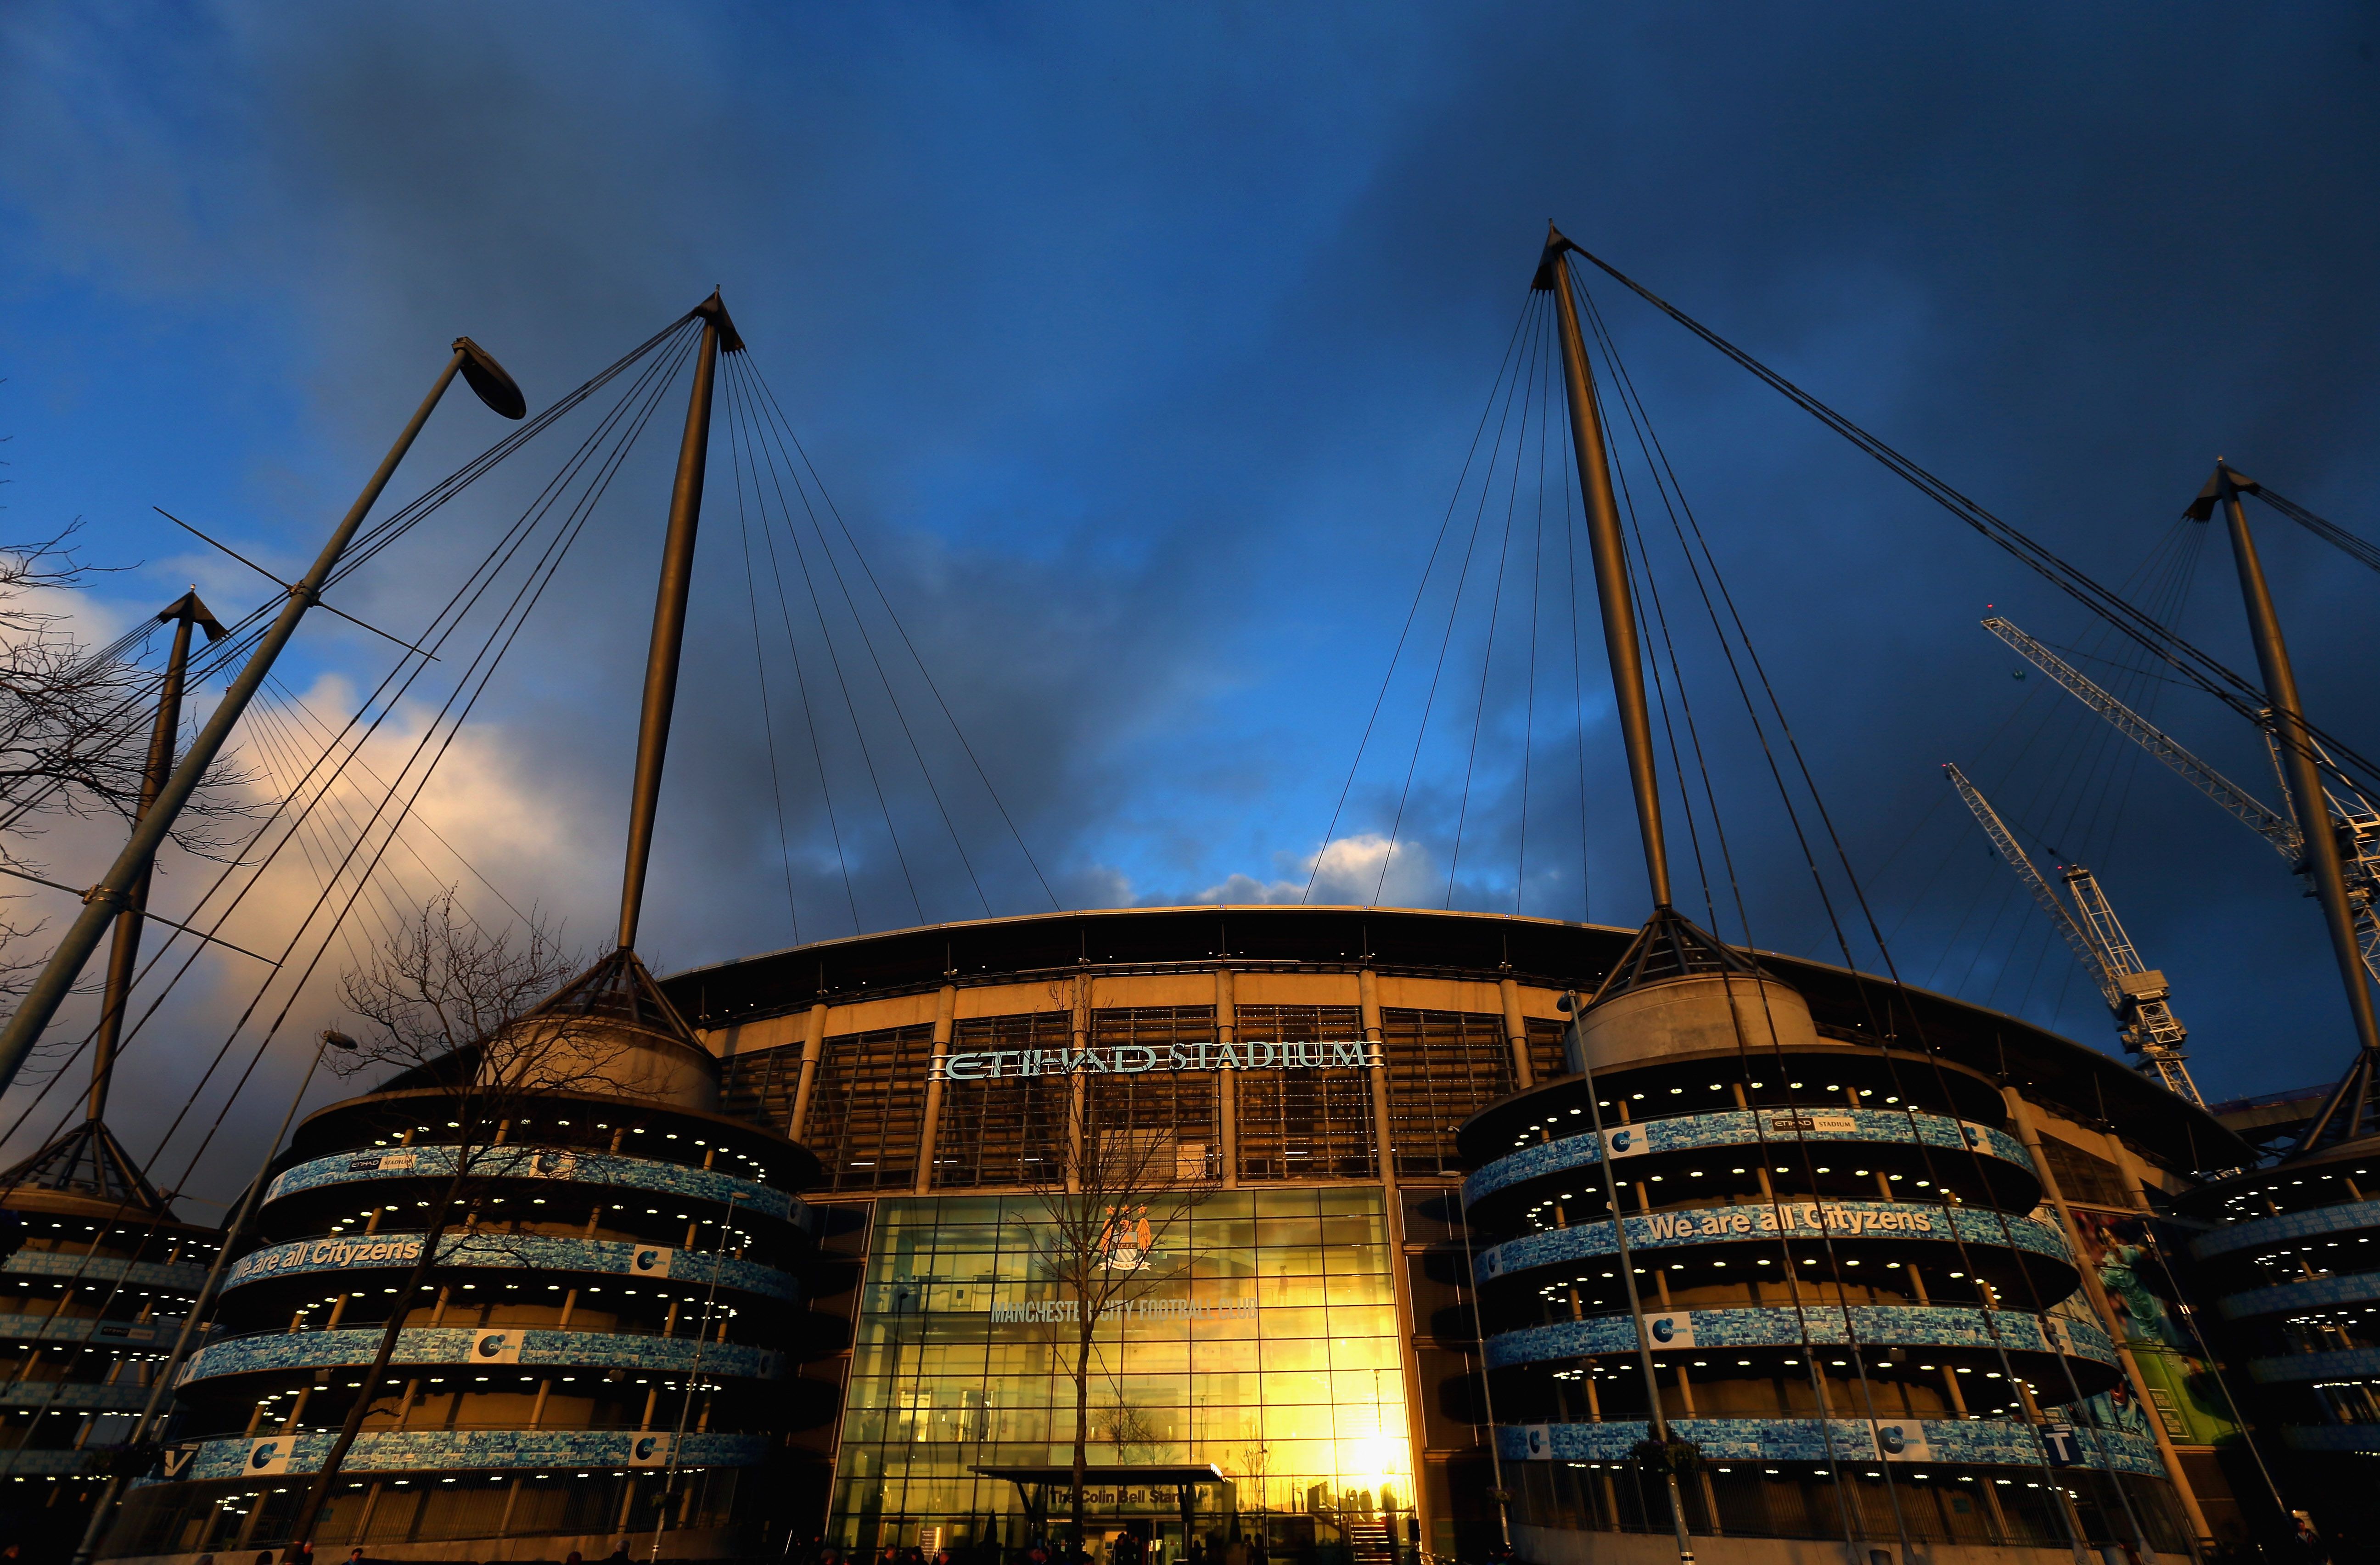 A general view of the Etihad Stadium, Manchester